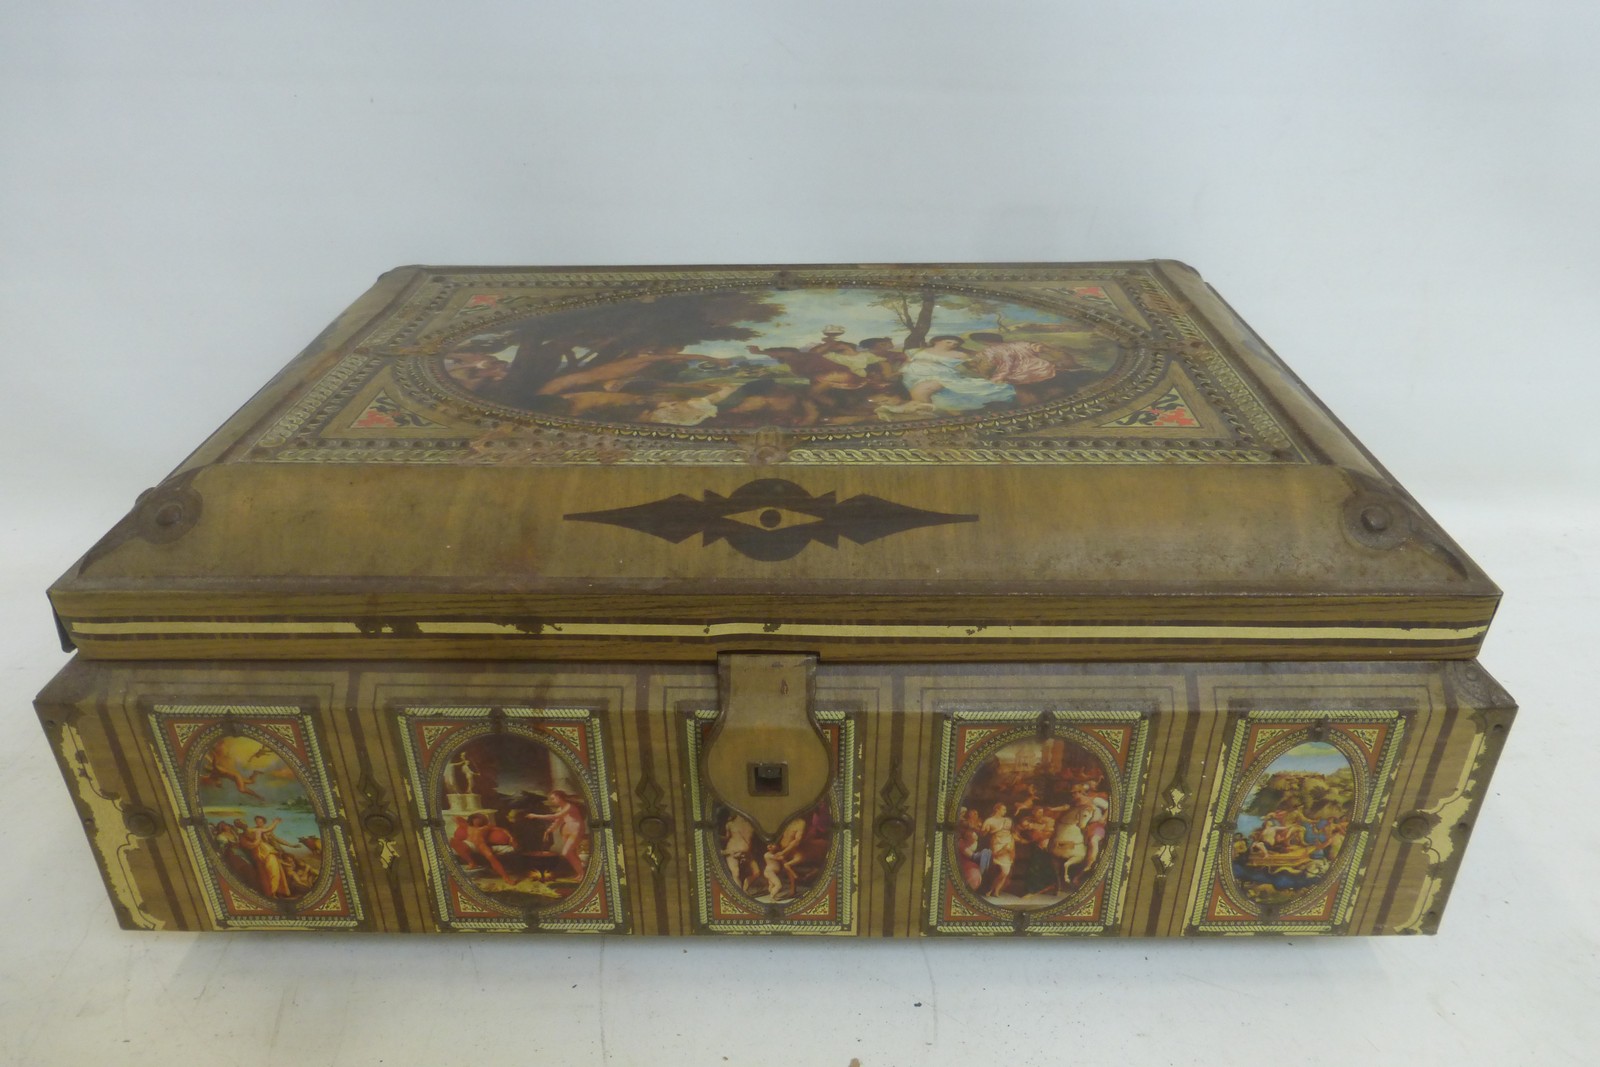 A large rectangular embossed tin decorated with classical scenes.